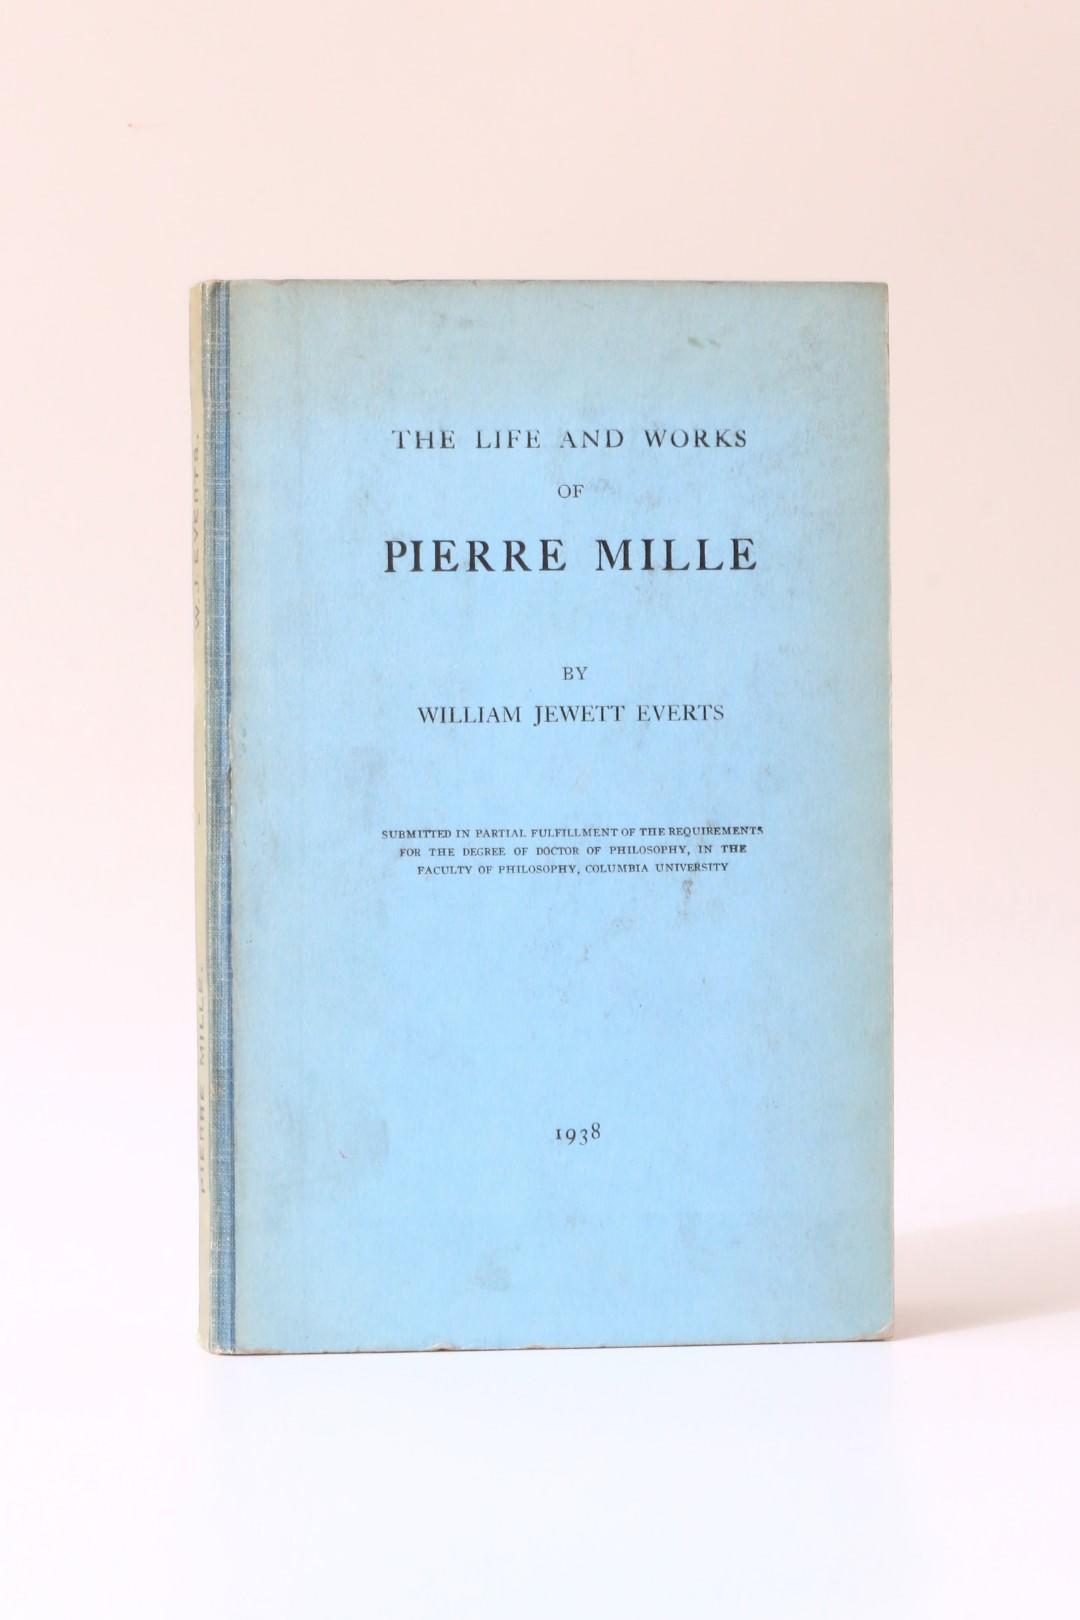 William Jewett Everts - The Life and Words of Pierre Mille - Columbia University, 1938, Manuscript.